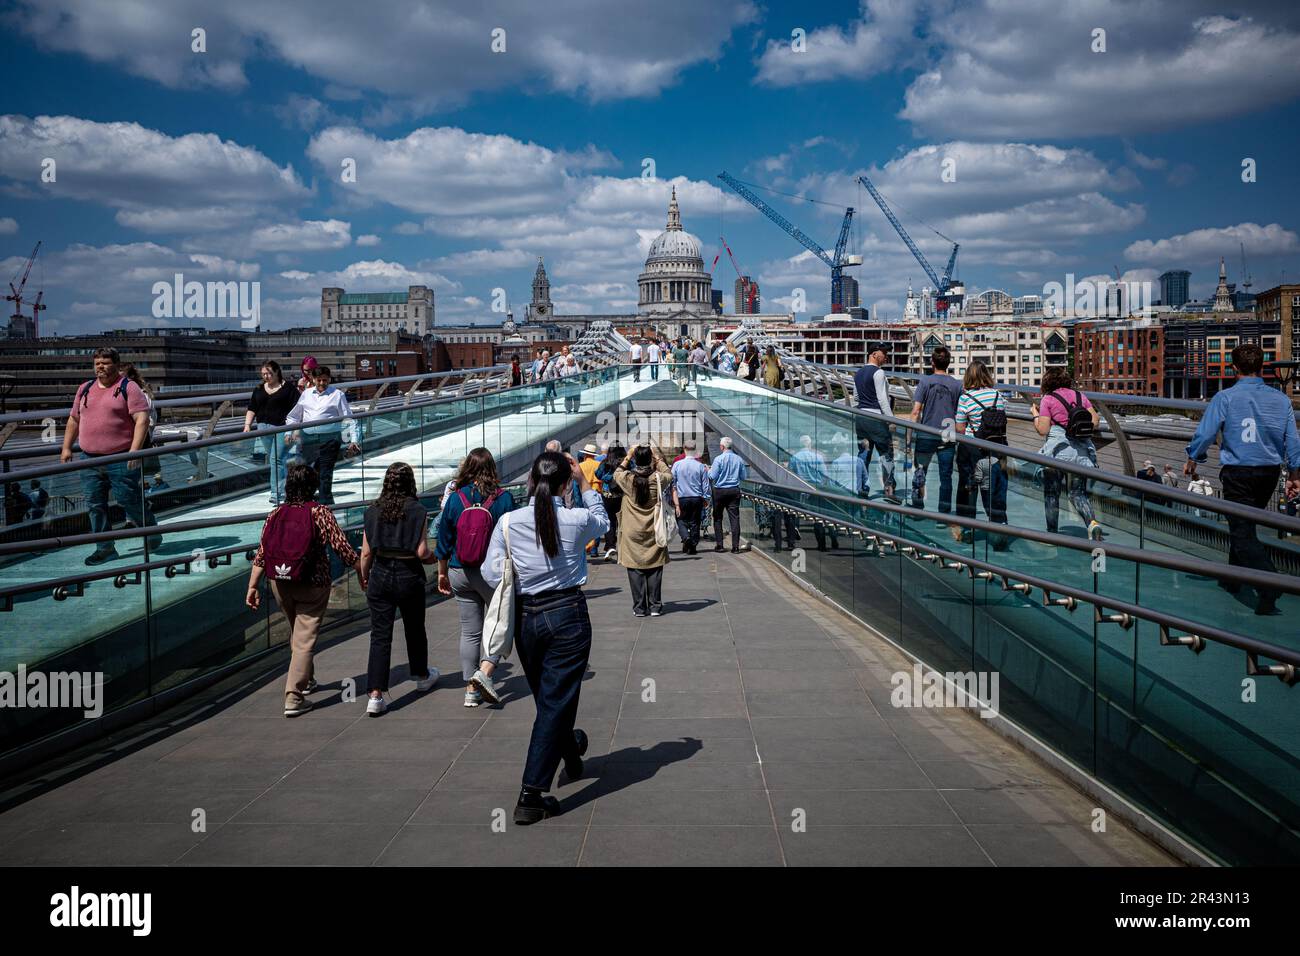 Millennium Bridge London - Tourists and commuters cross the Millennium Bridge between St Pauls Cathedral and the Tate Modern Art Gallery. Stock Photo